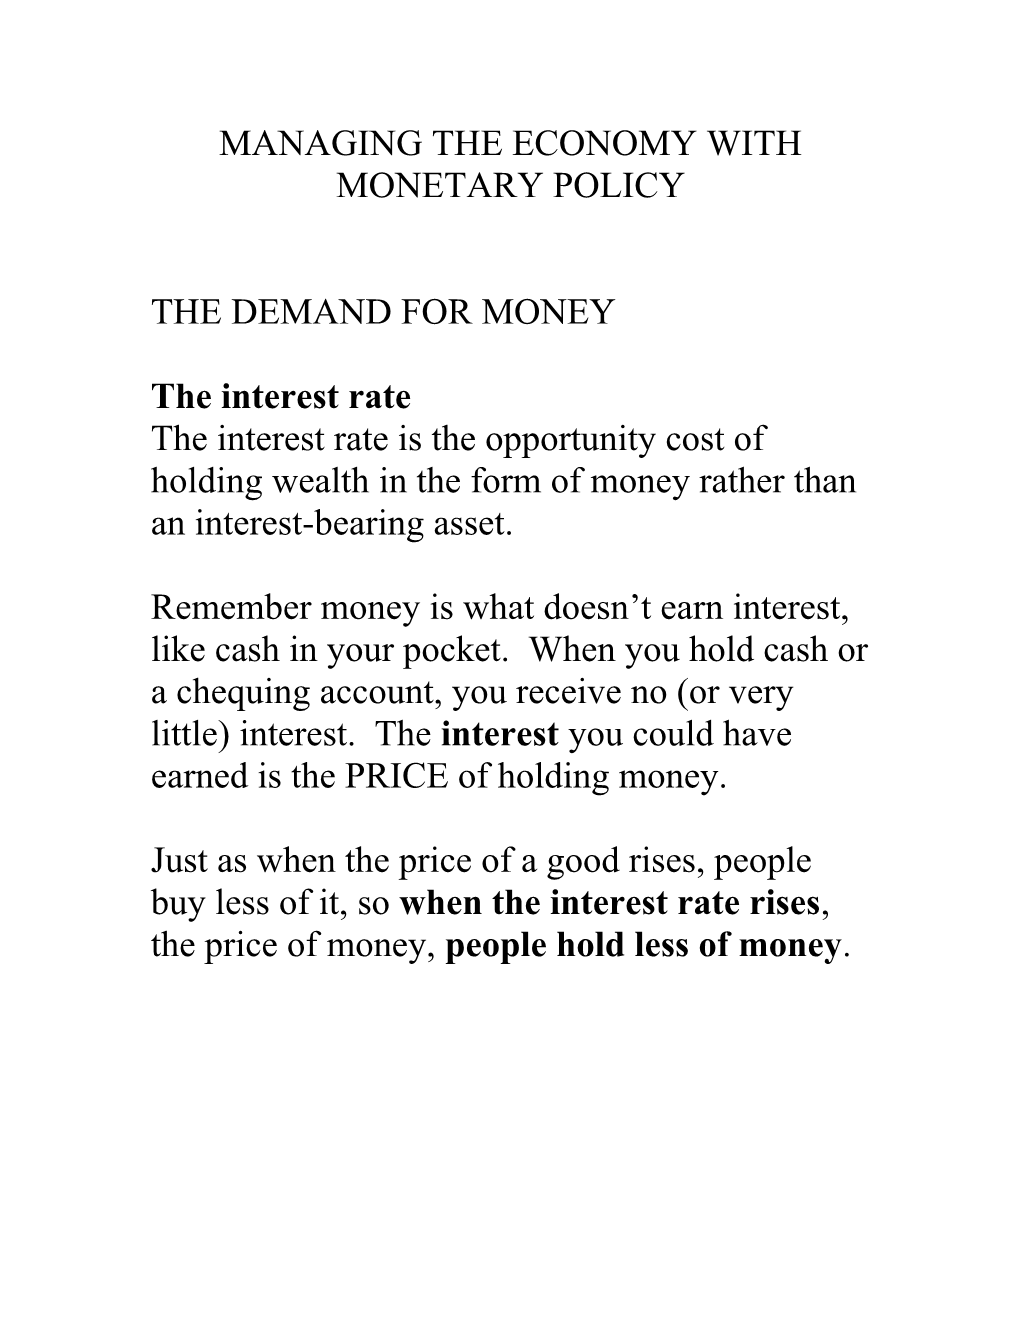 Managing the Economy with Monetary Policy